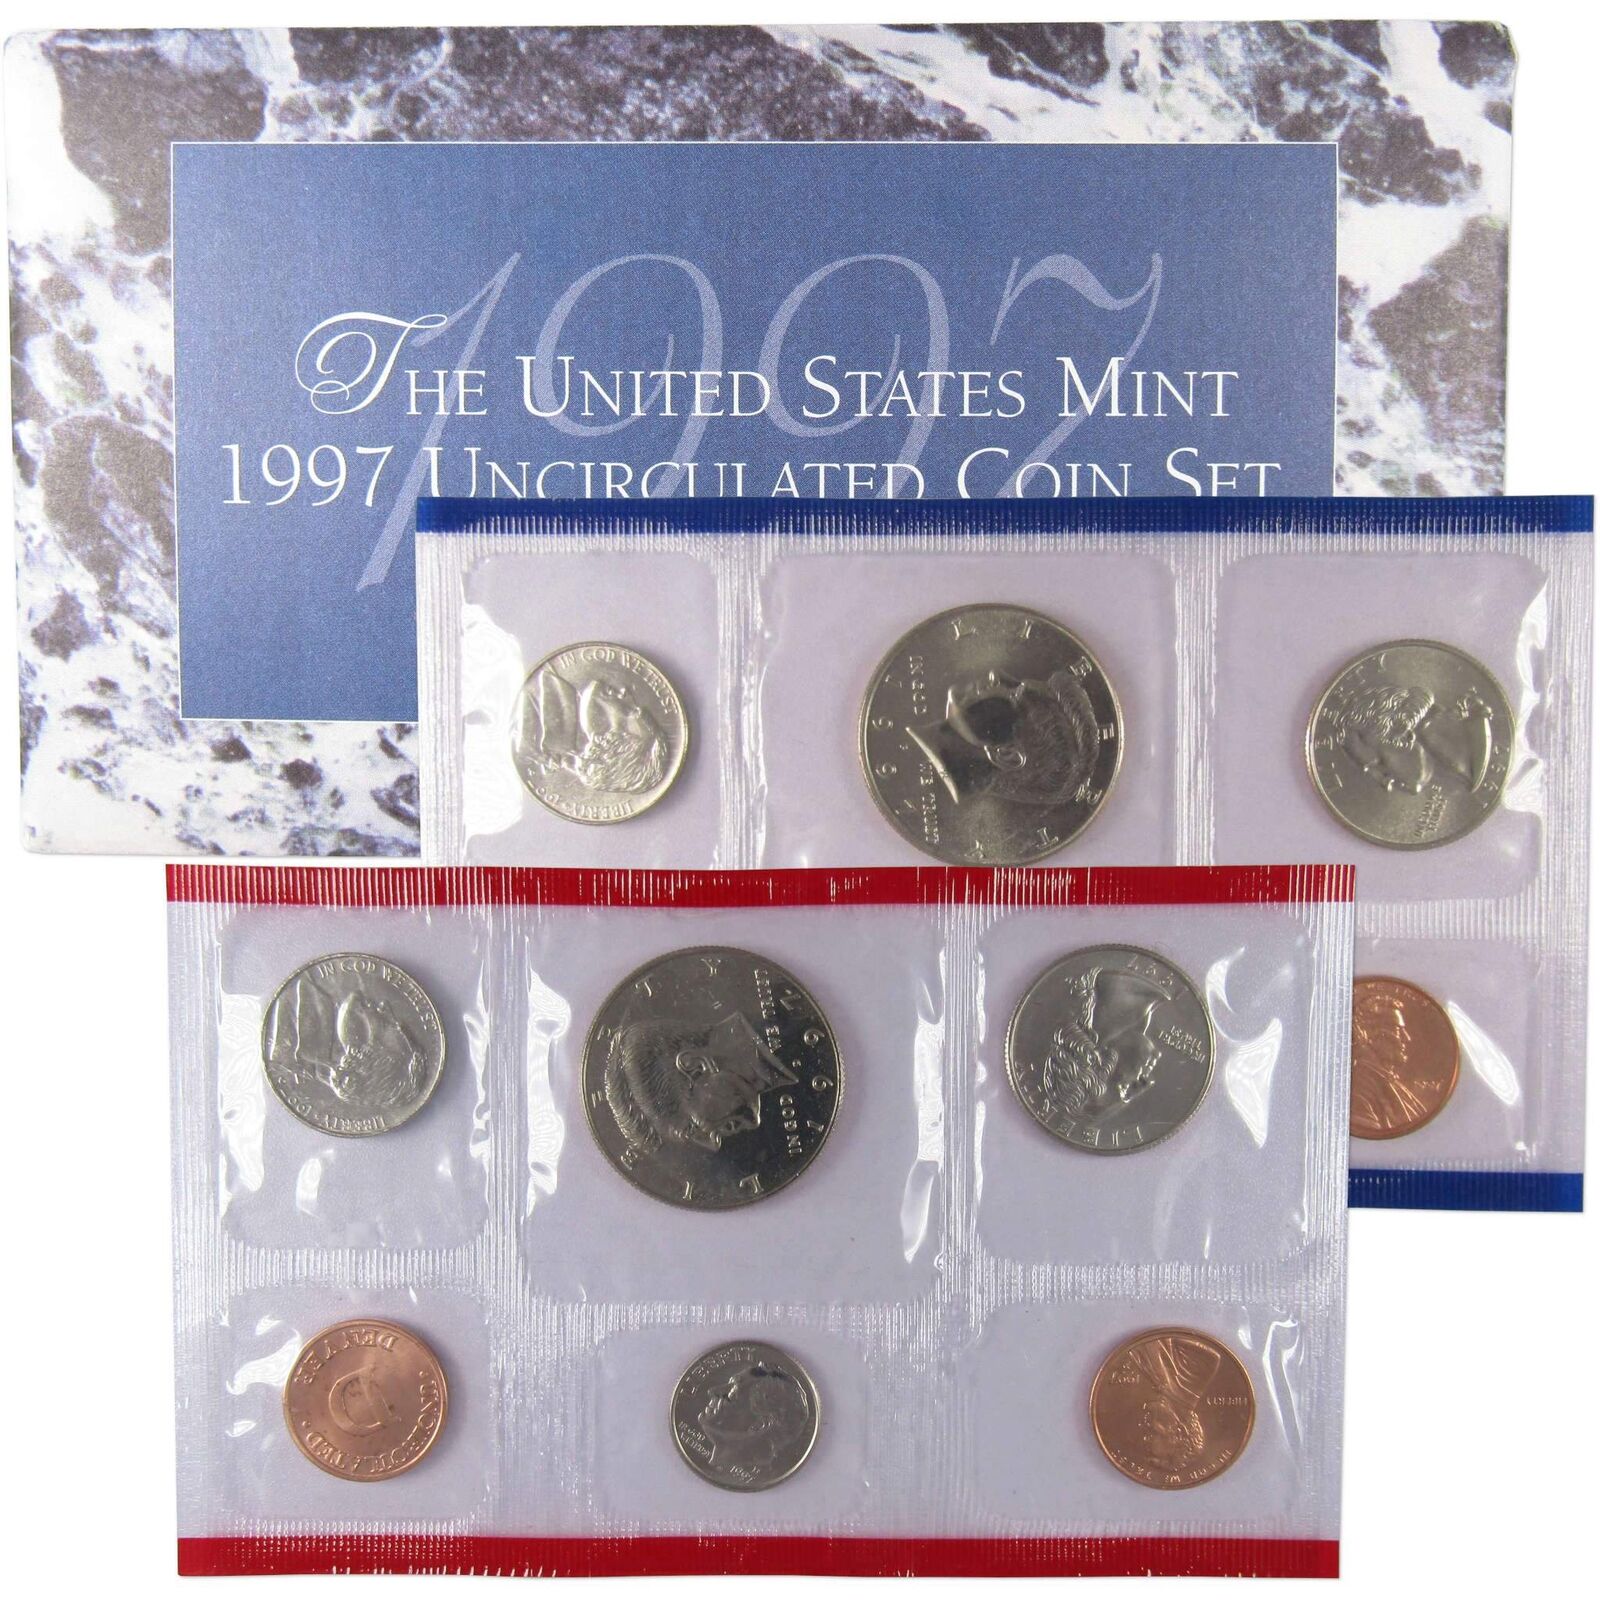 1997 Uncirculated Coin Set U.S Mint Original Government Packaging OGP